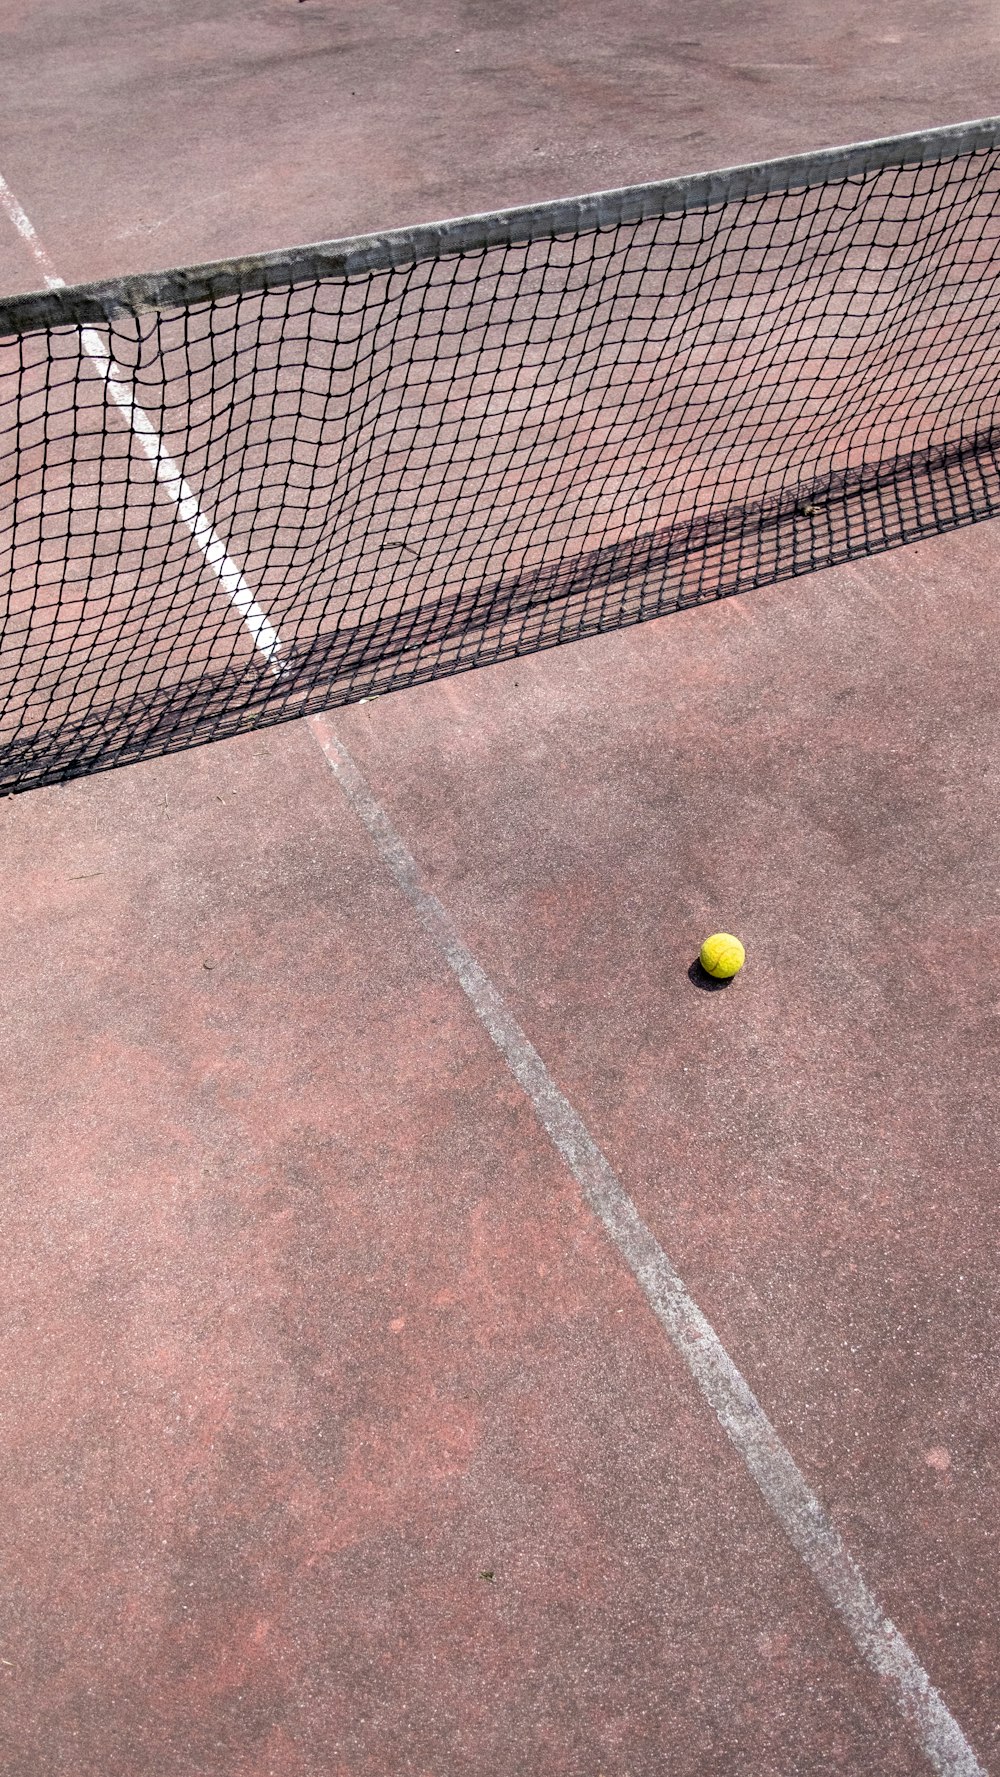 a tennis ball is on the tennis court